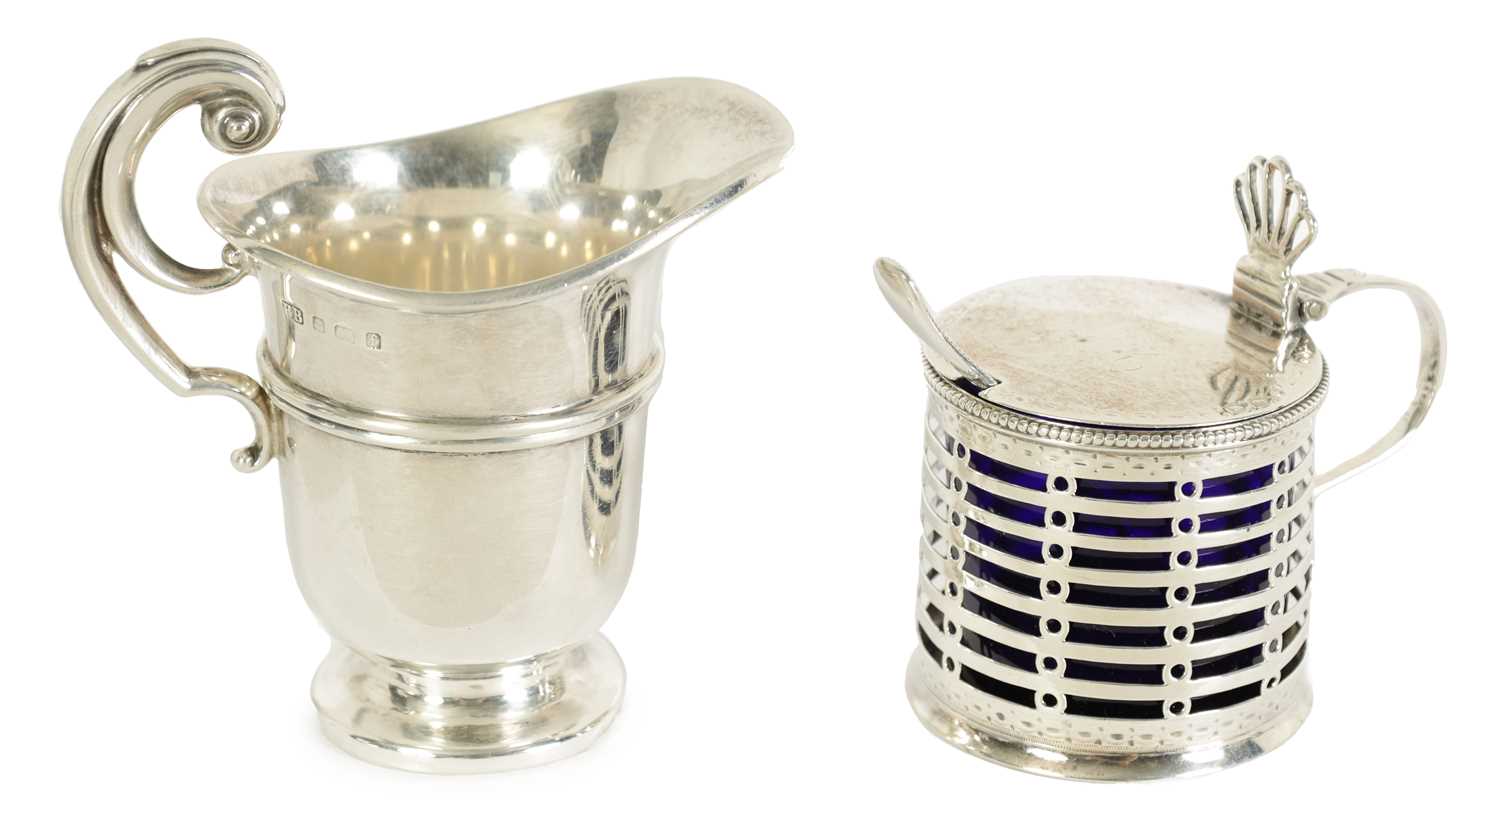 A GEORGE III SILVER MUSTARD POT WITH BLUE GLASS LINER